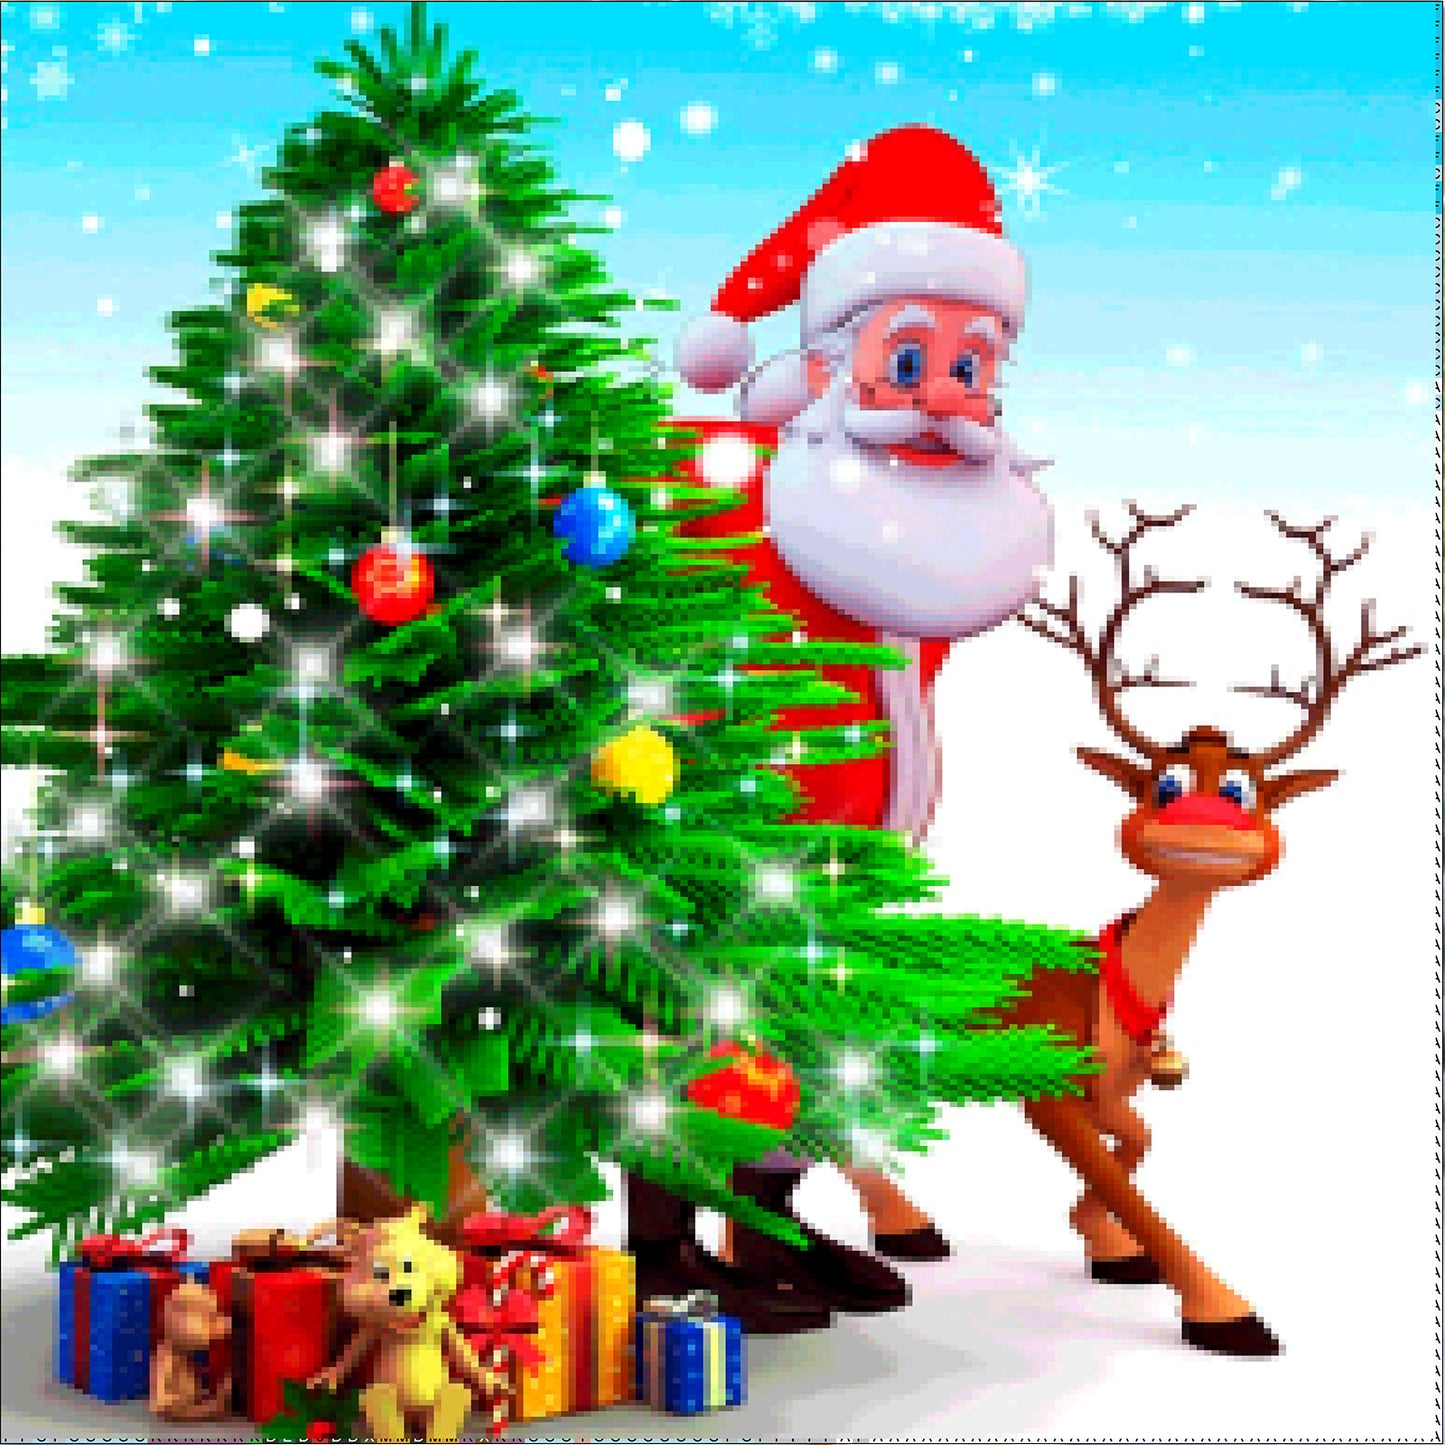 4 Sets Merry Christmas Santa 5D Full Drill Diamond Painting Embroidery for Cross Stitch Kits DIY for Rhinestone Crystal